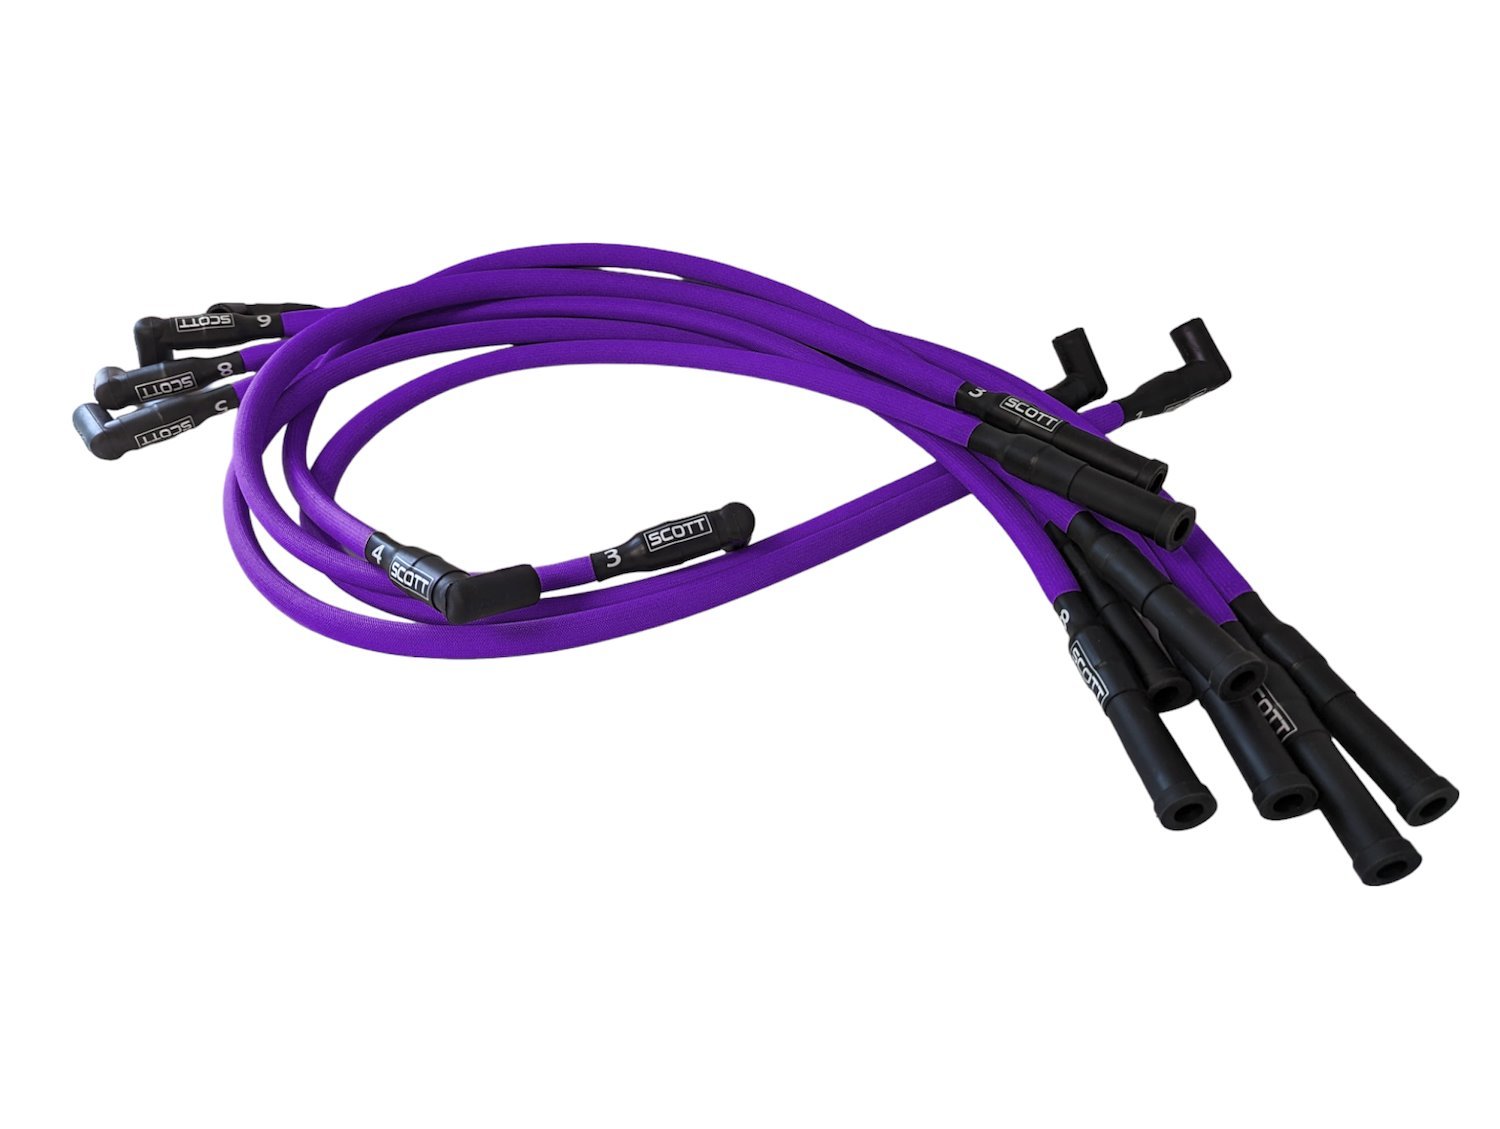 SPW-PS-421-7 High-Performance Fiberglass-Oversleeved Spark Plug Wire Set for Small Block Chevy, Over Valve Cover [Purple]